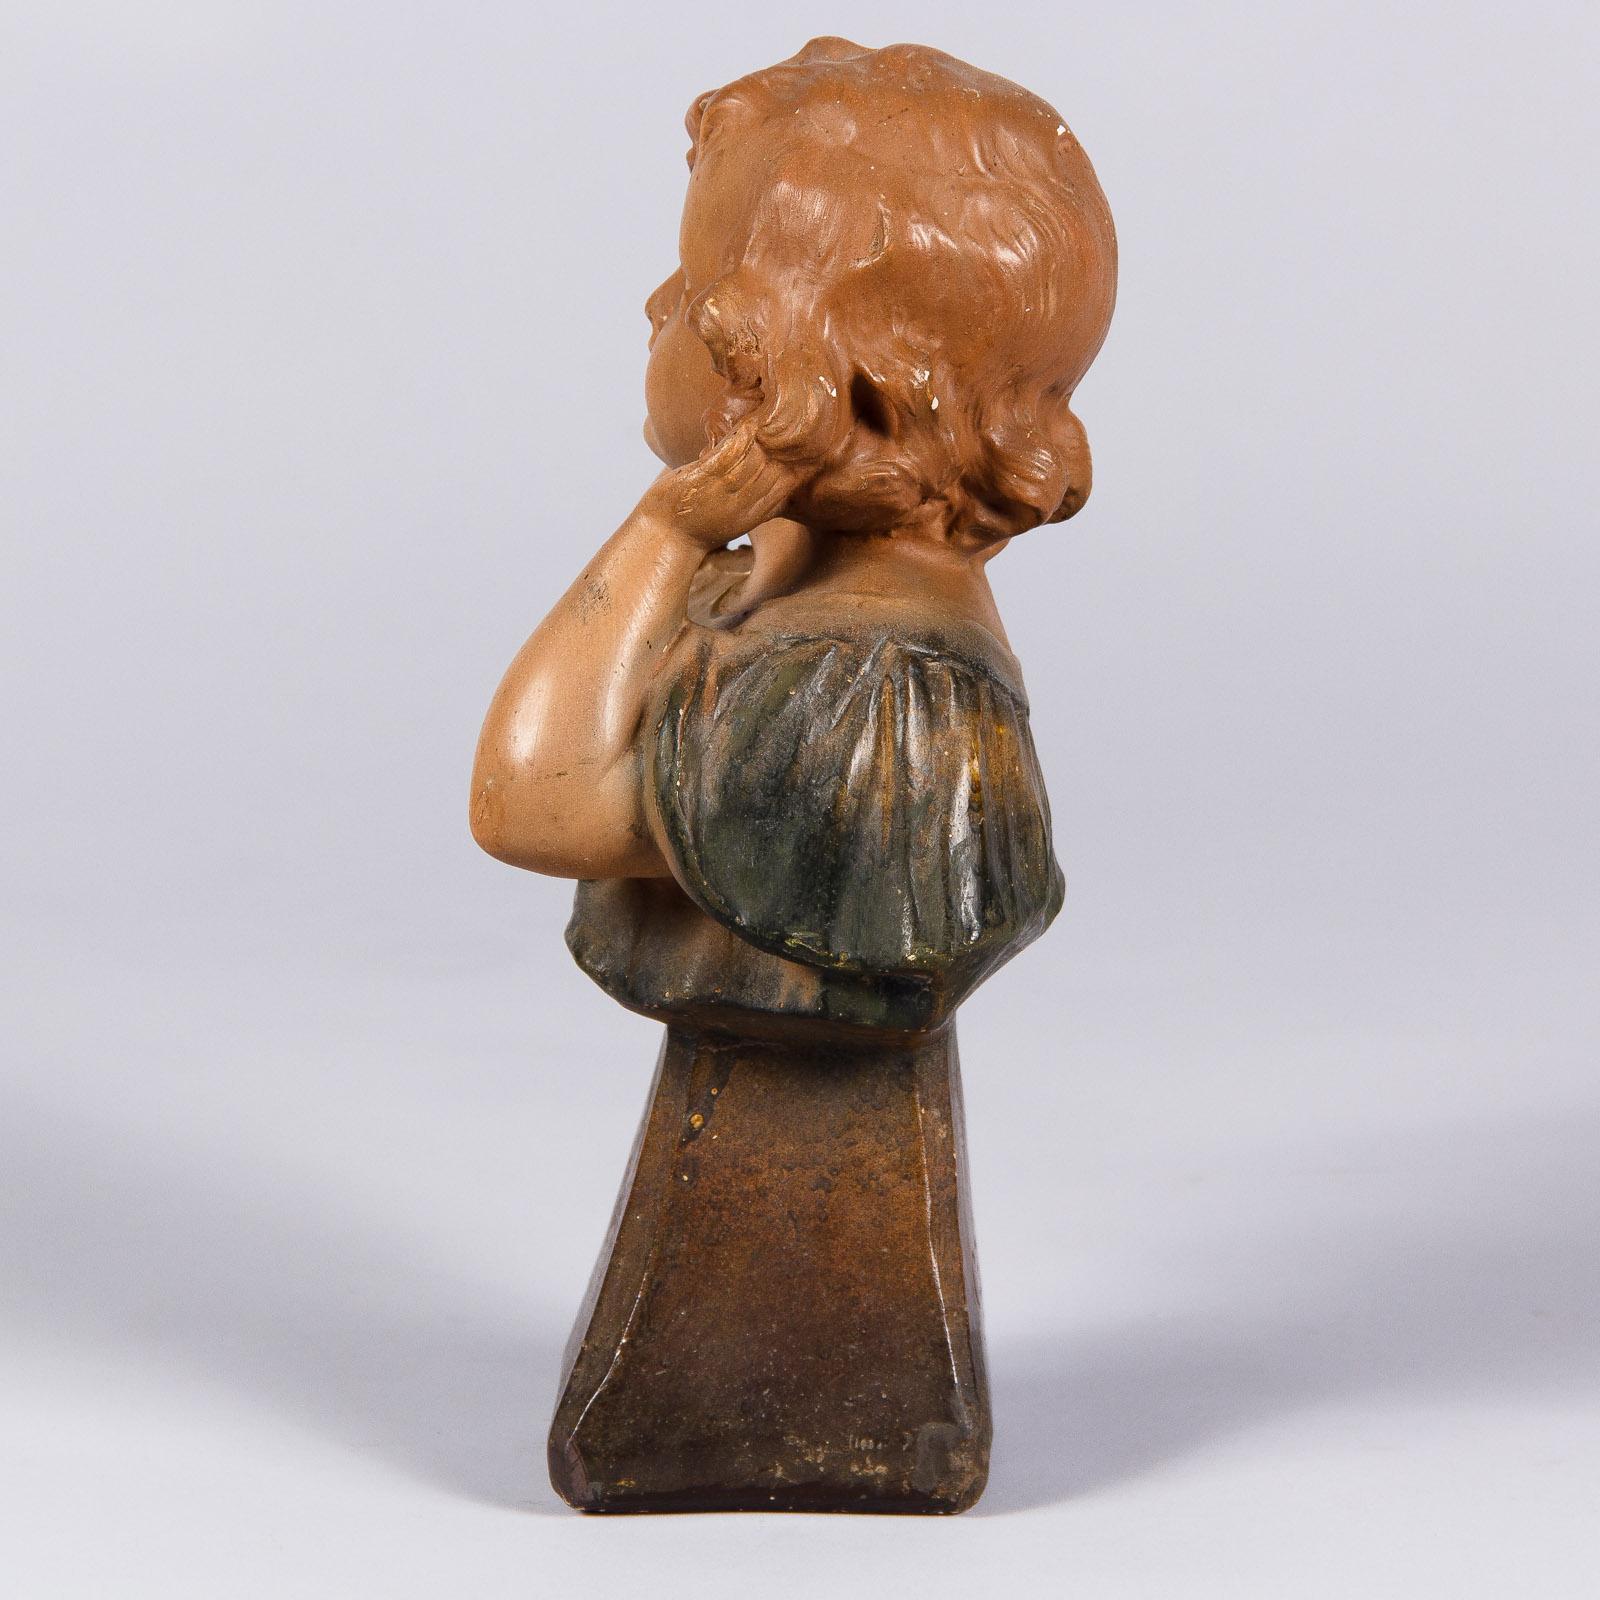 French Young Girl Bust Sculpture Signed C.F. Paris, France, 1920s